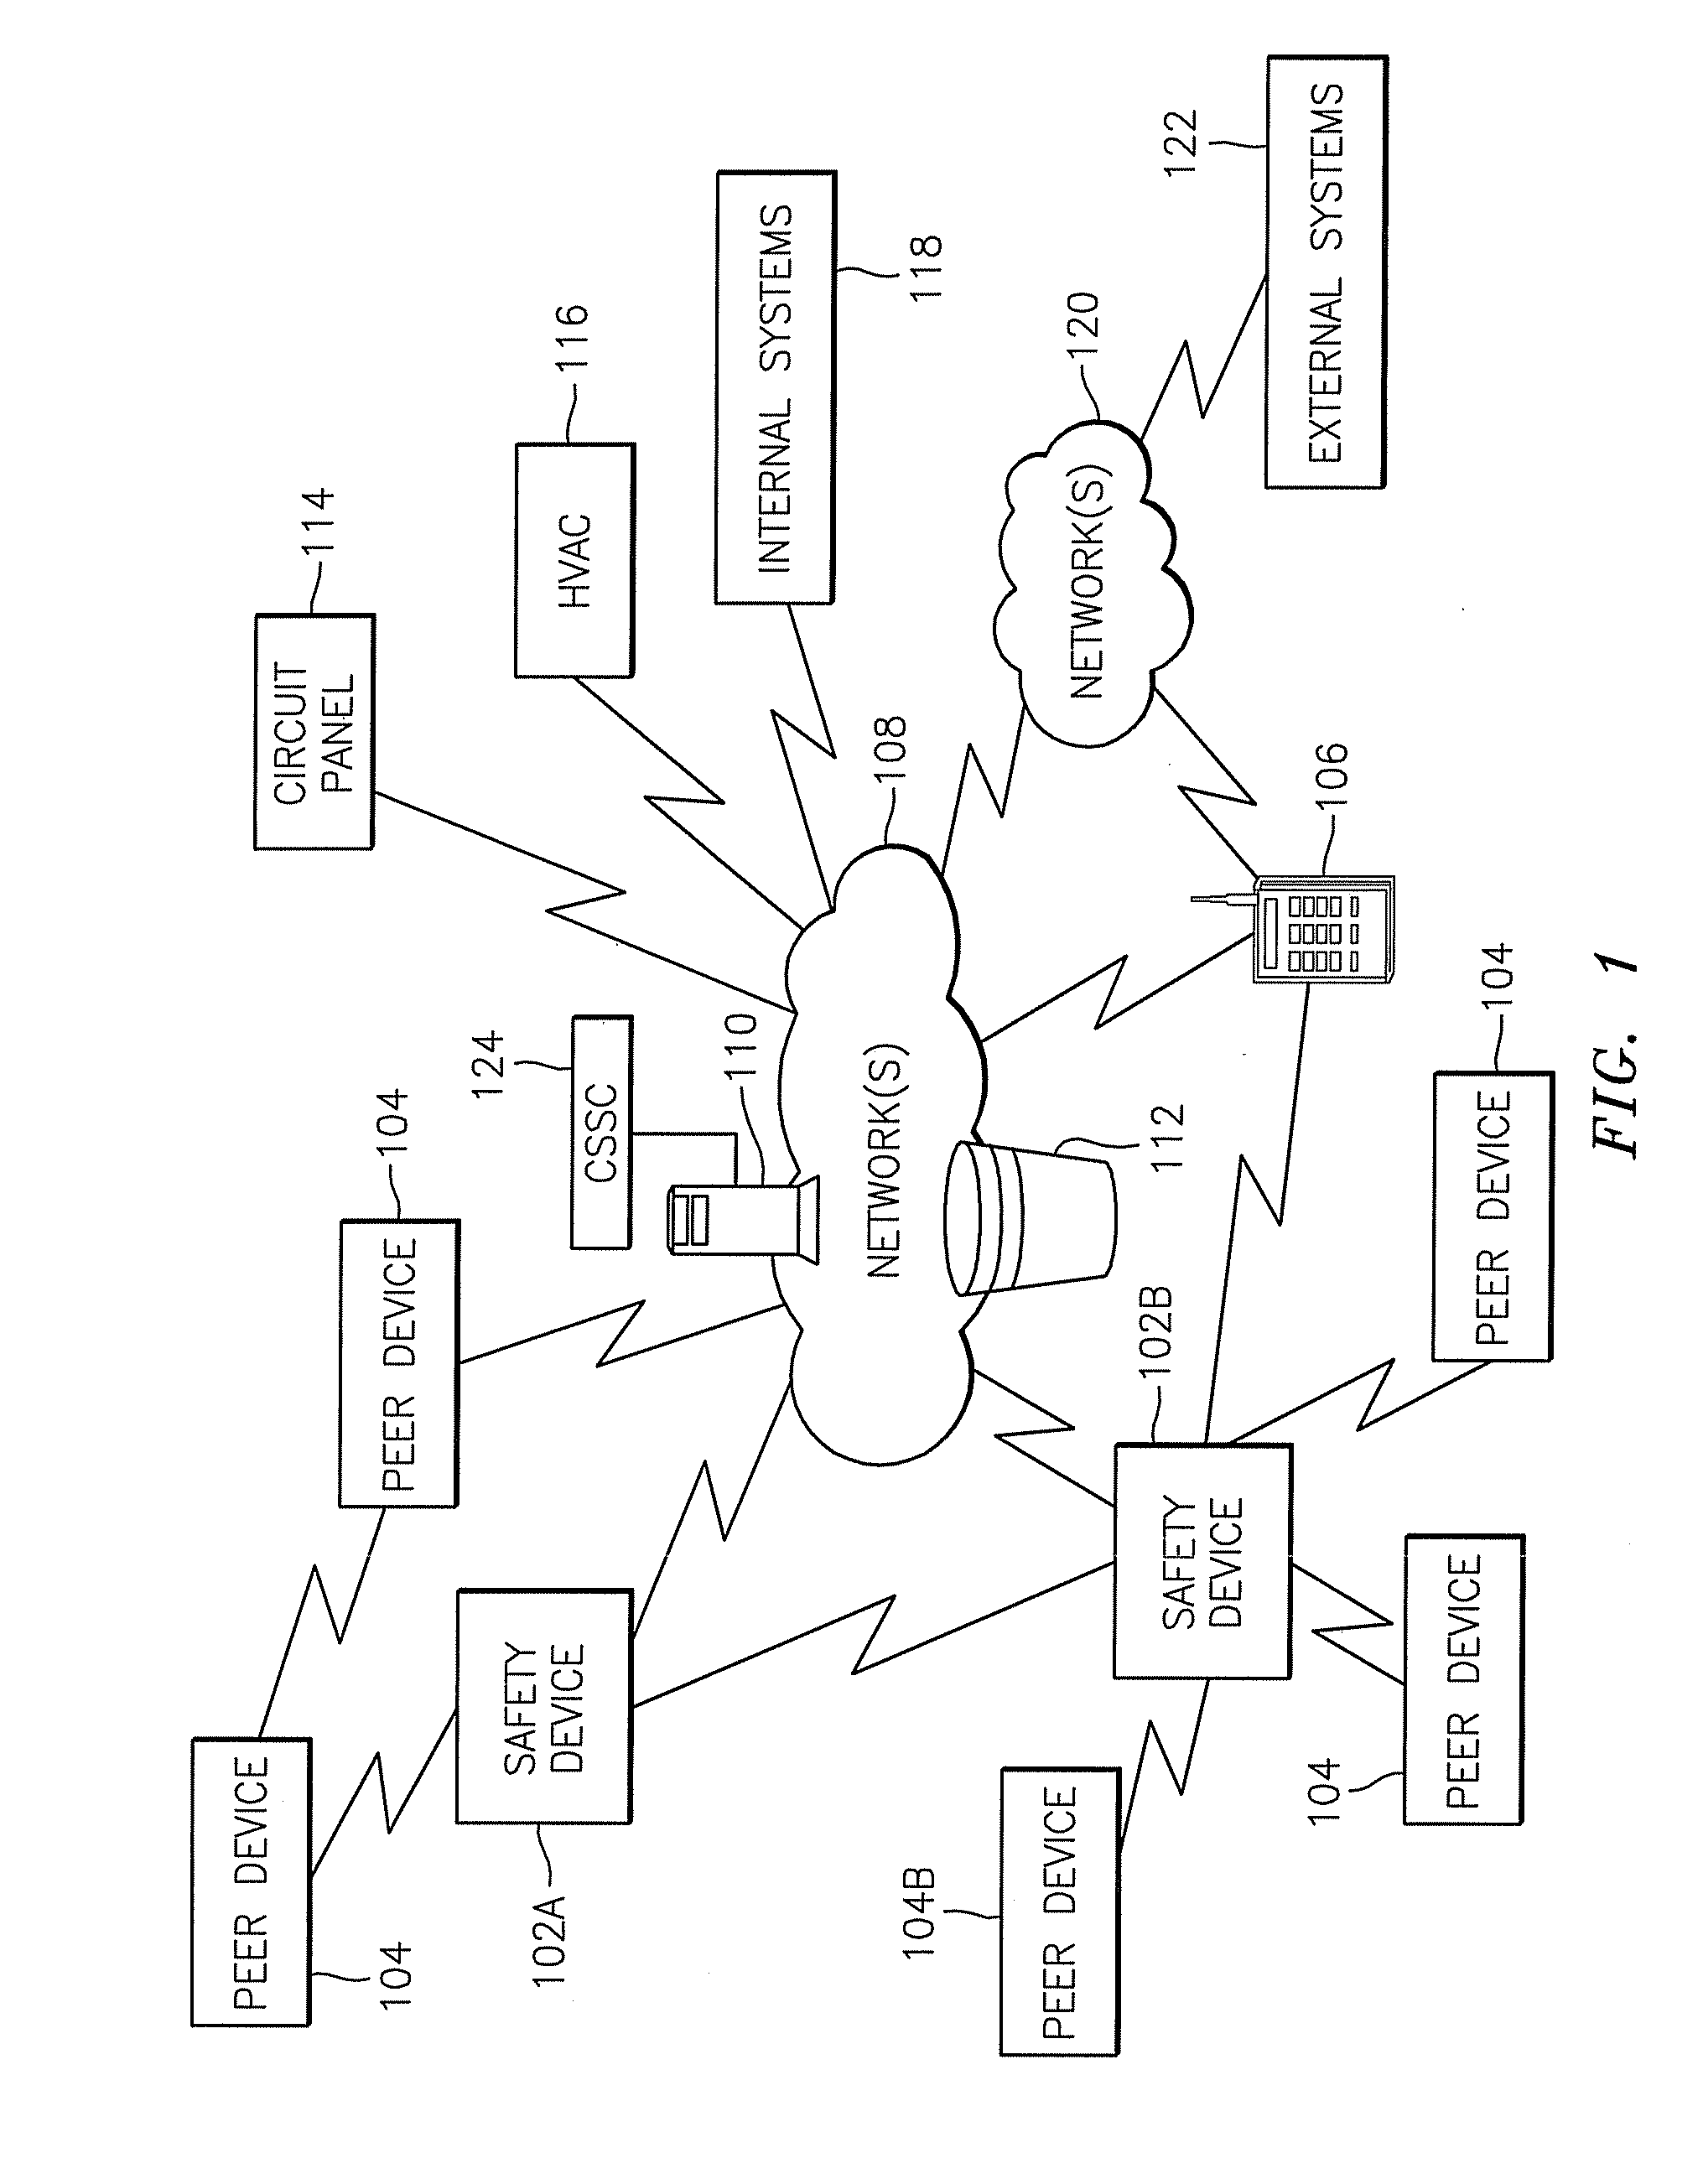 Methods, apparatuses, and computer program products for implementing remote control processes